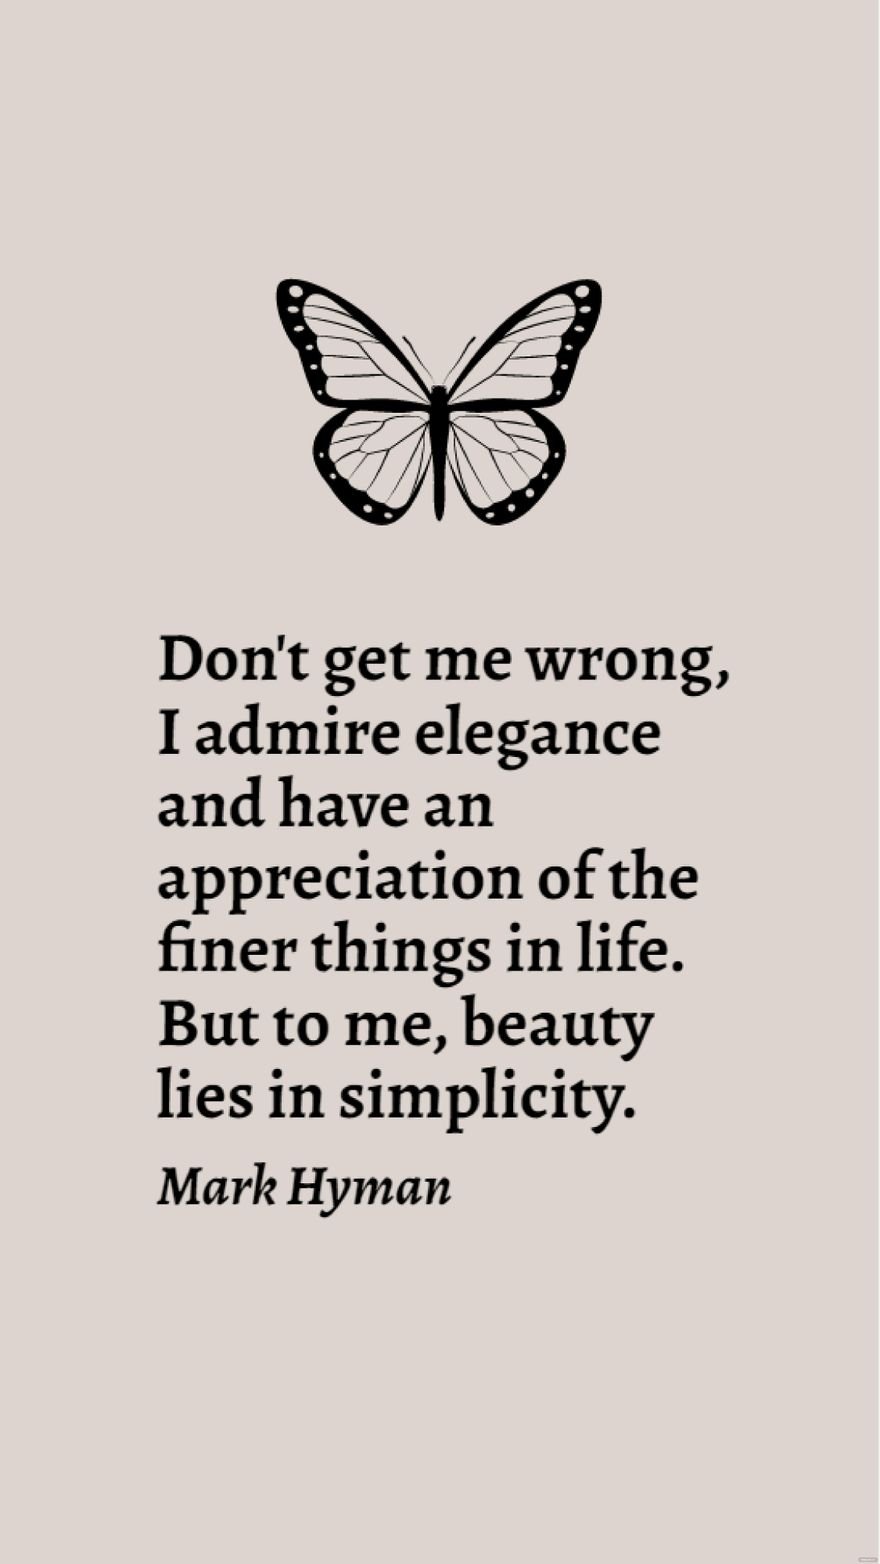 Mark Hyman - Don't get me wrong, I admire elegance and have an appreciation of the finer things in life. But to me, beauty lies in simplicity. in JPG